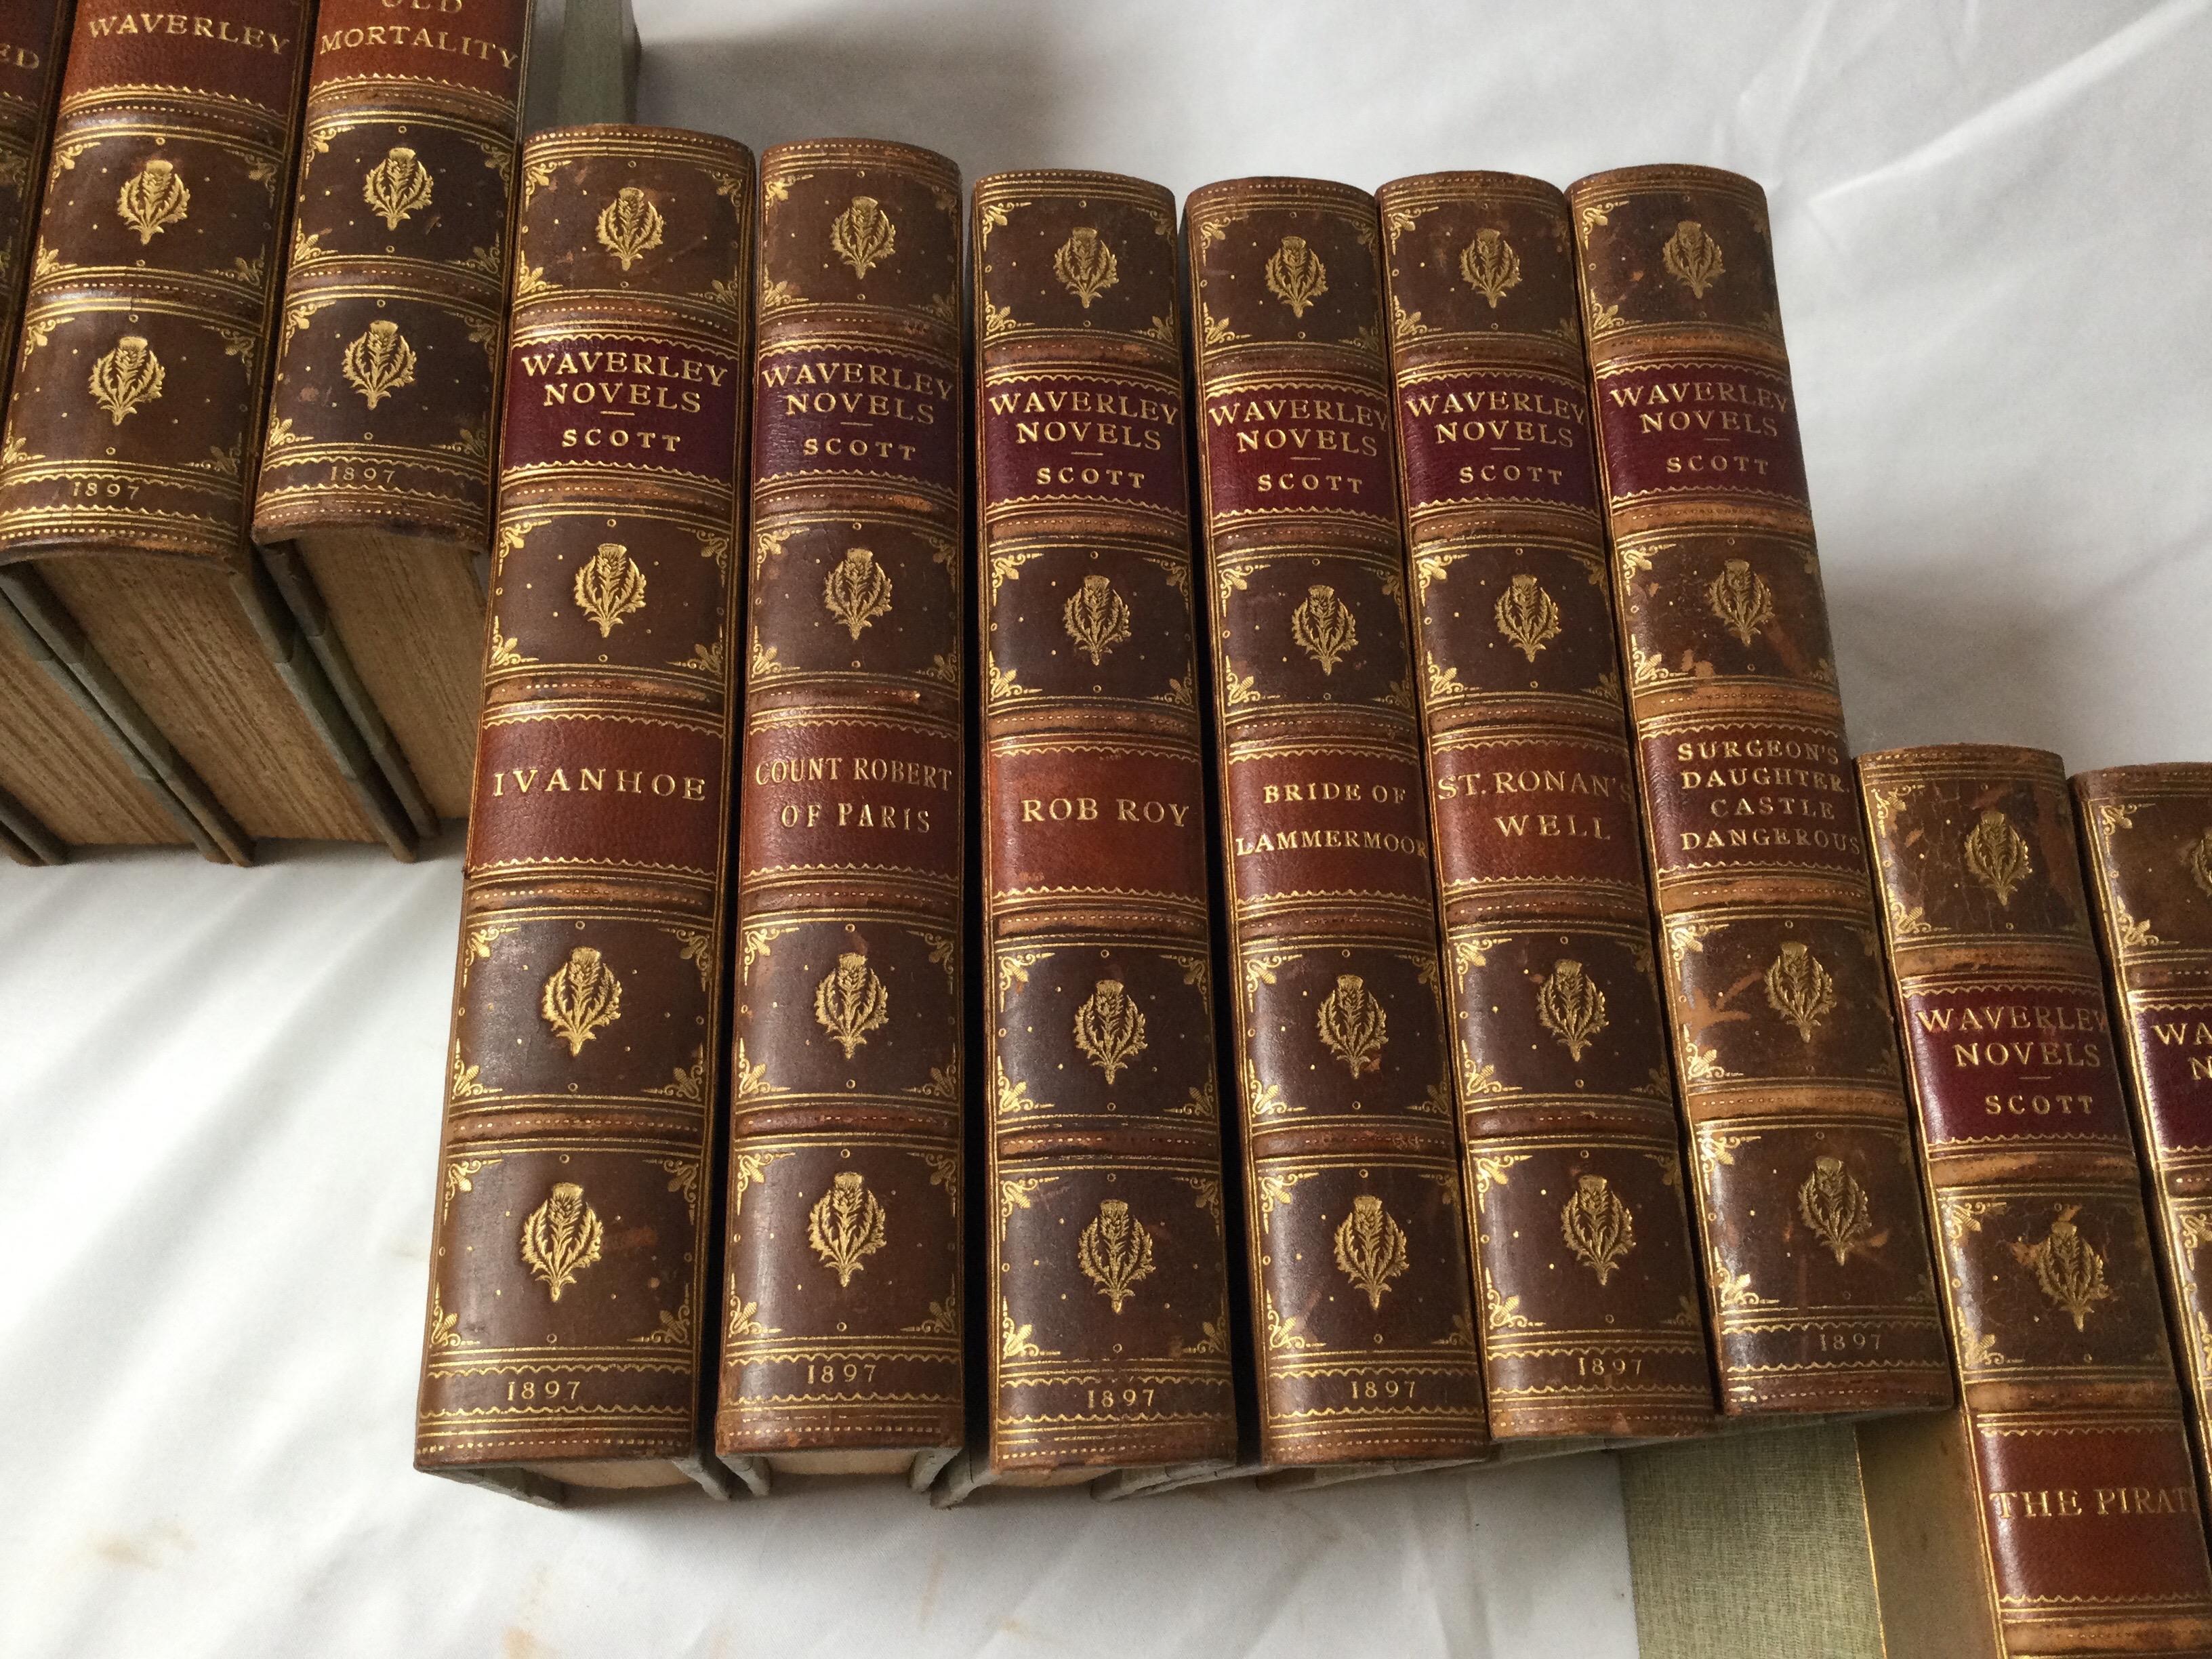 19th Century Set of 22 Leather Bound Books, The Waverly Novels by Sir Walter Scott